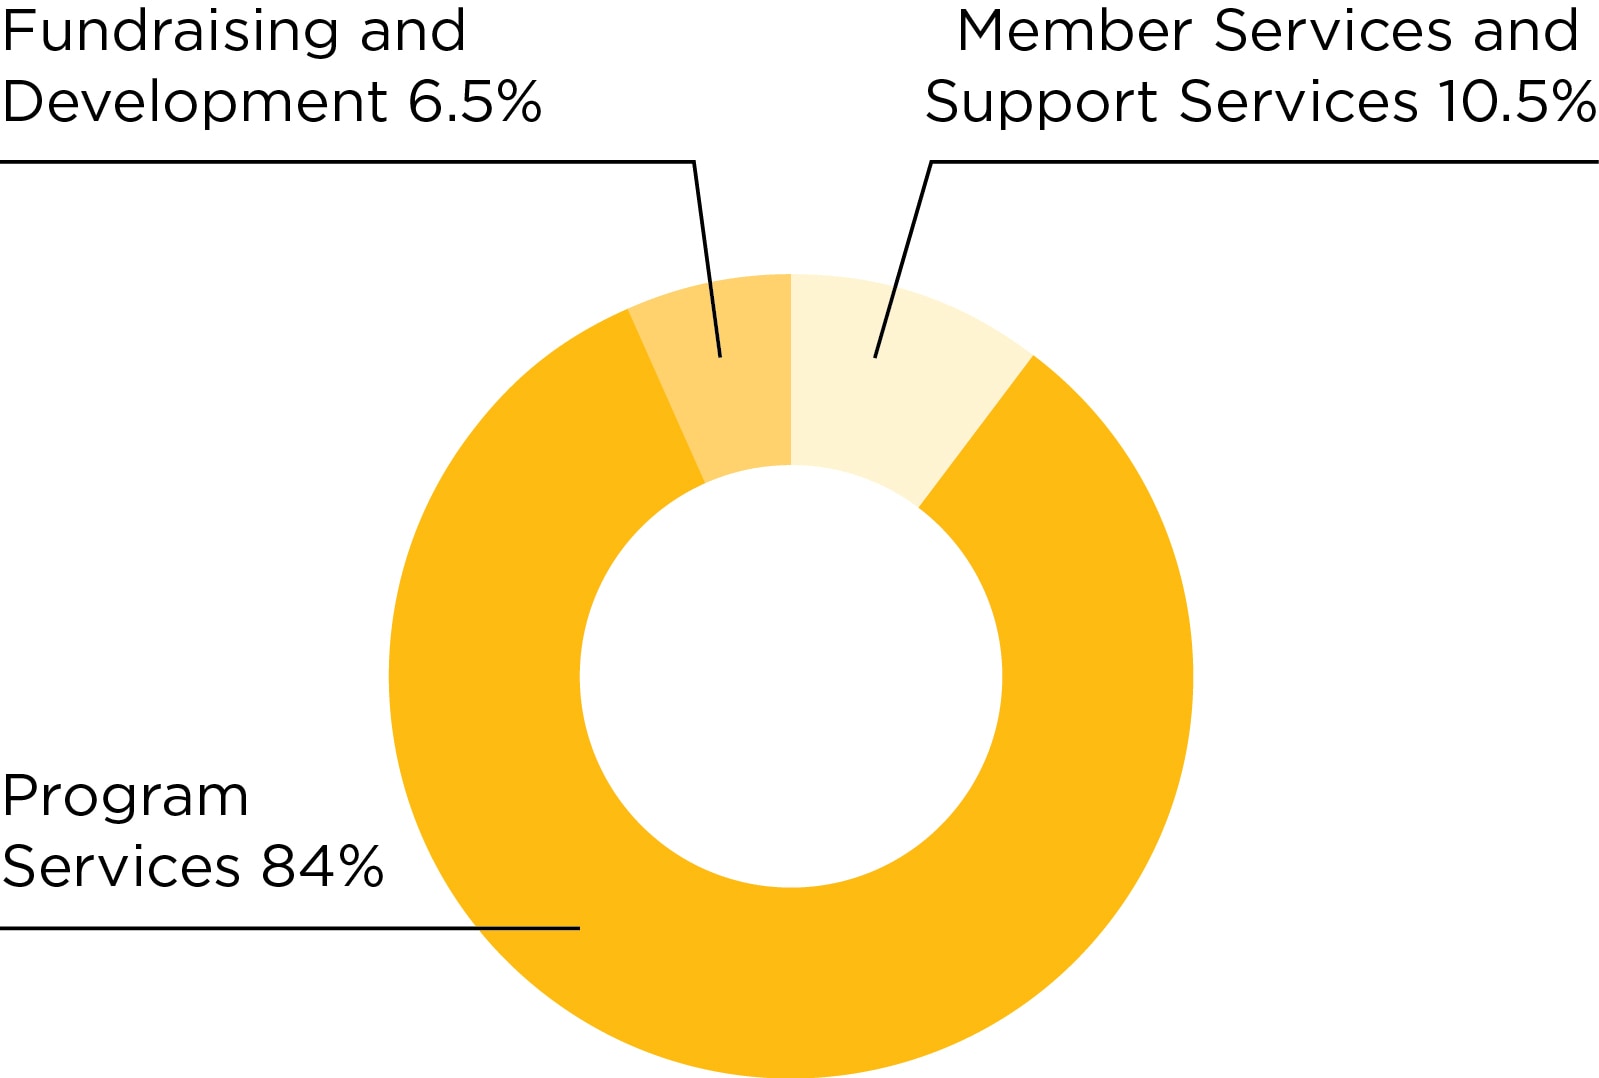 Chart: 2022 total expenses: Program services, 84 percent; member and support services, 10.5 percent; fundraising and development, 6.5 percent.